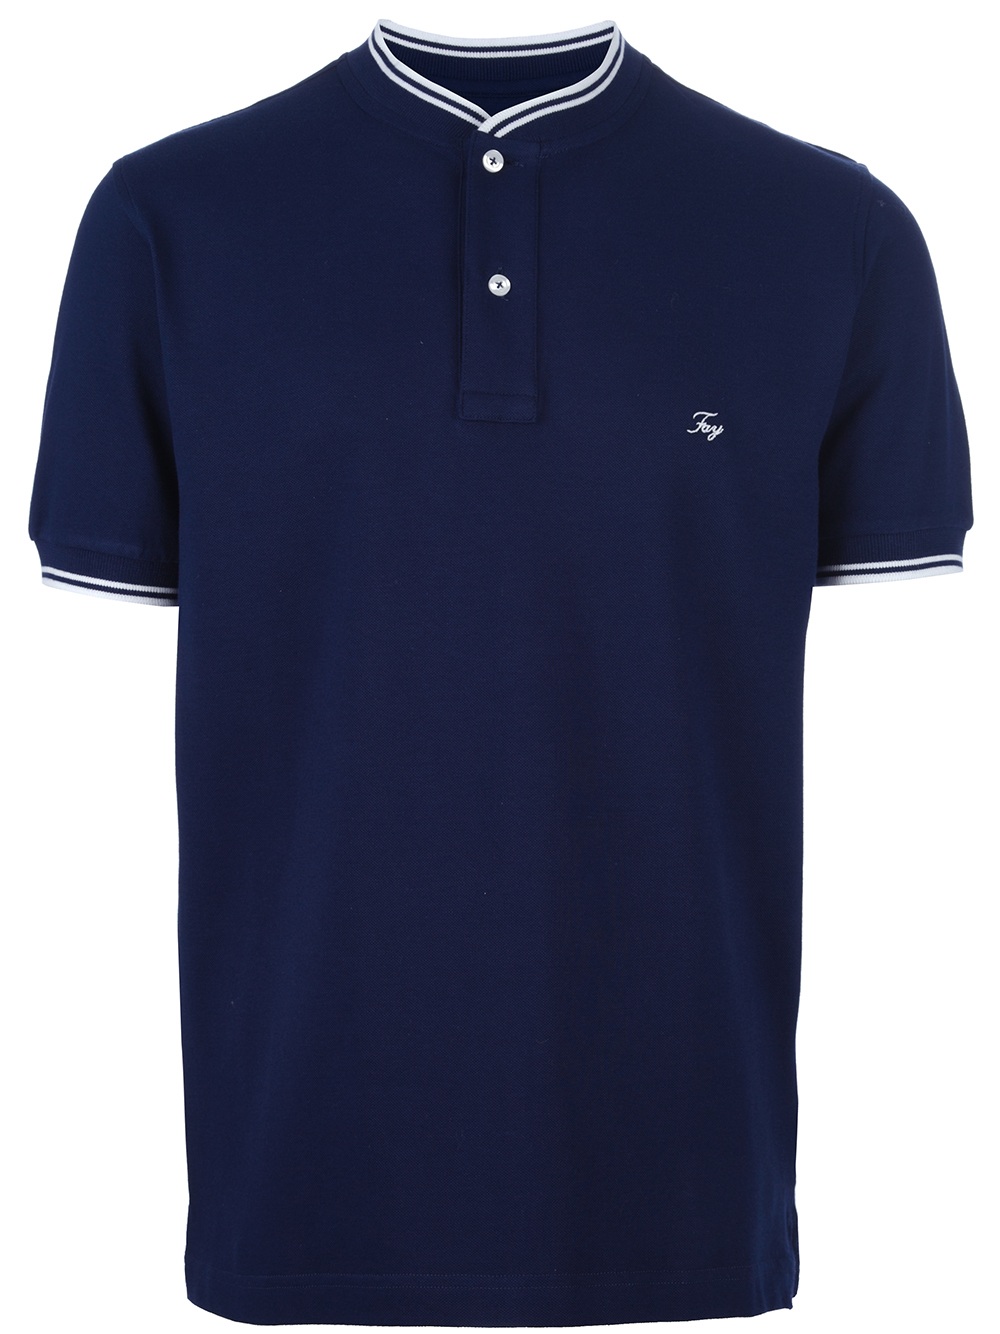 Fay Collarless Polo Shirt in Blue for Men - Lyst